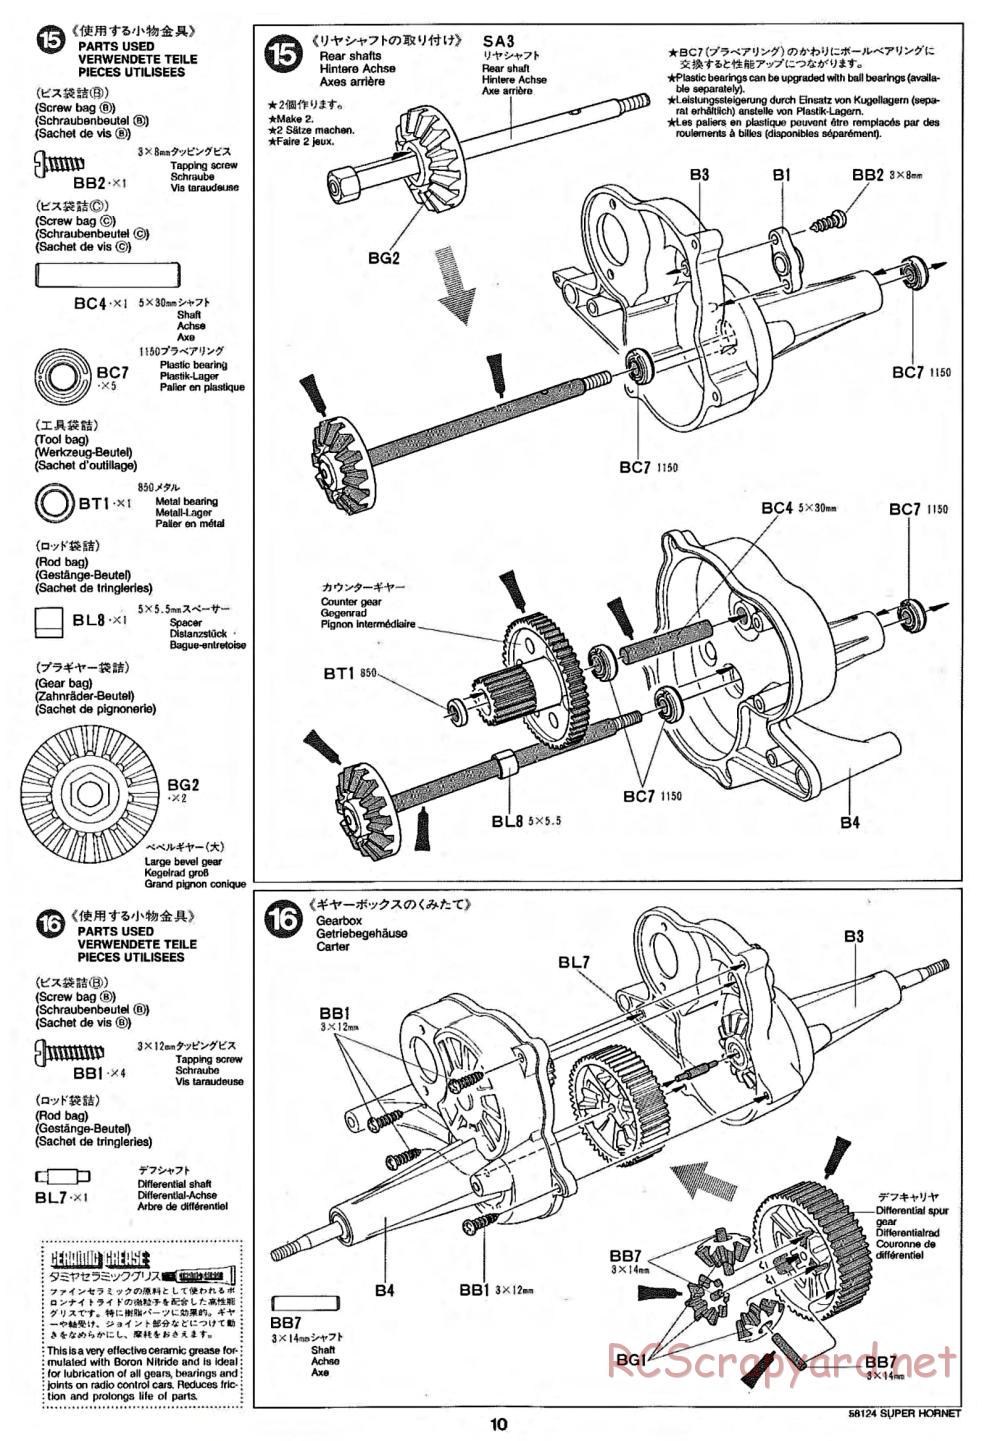 Tamiya - Super Hornet Chassis - Manual - Page 10